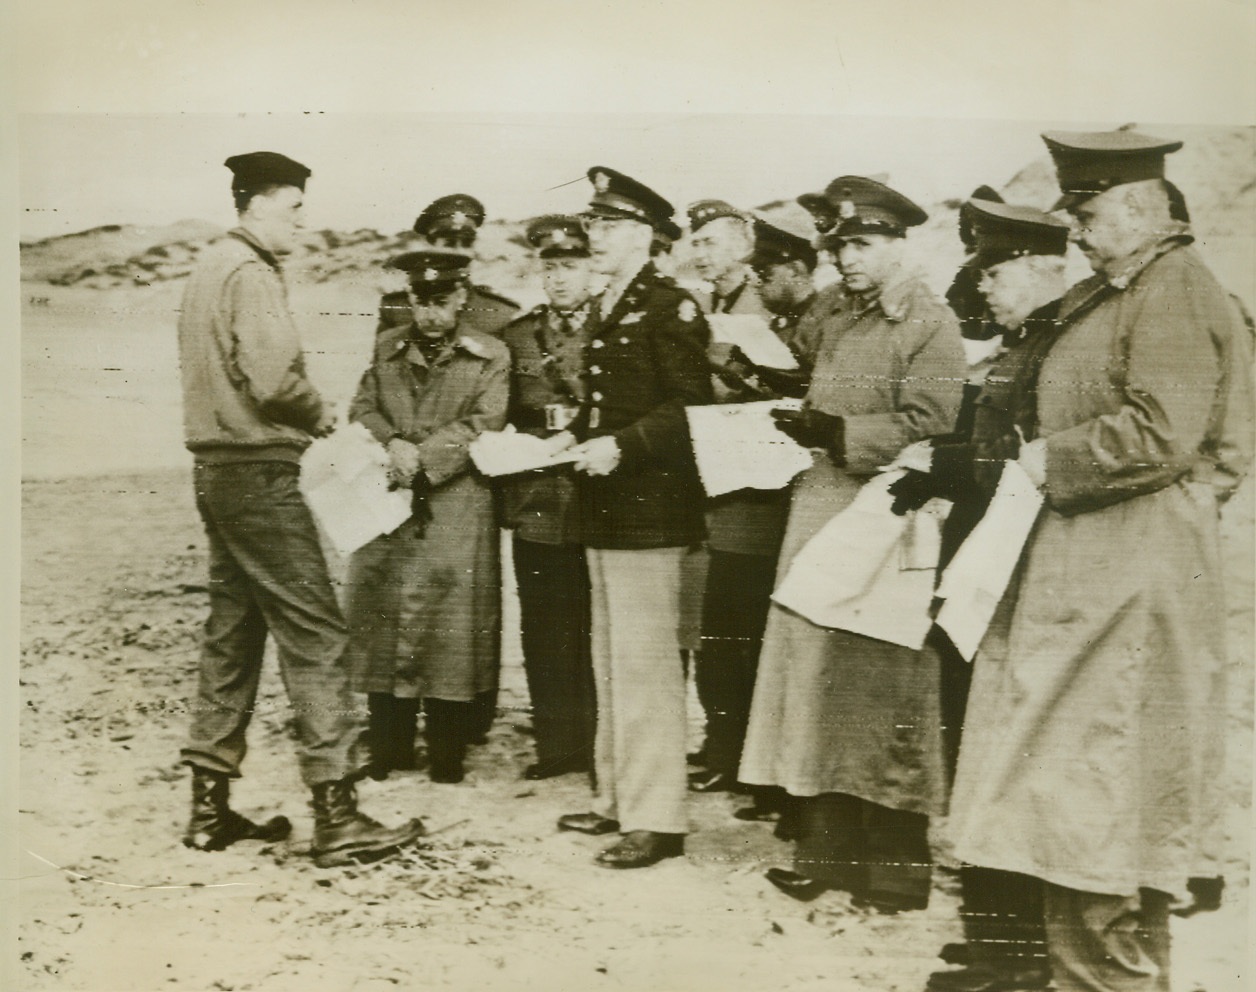 Brazilian Army Men in North Africa, 12/14/1943. North Africa—Members of the Brazilian-U.S. Joint Defense Commission listen to Maj. Dudley Williams give a resume of the Allied invasion of Algeria at St. Eugene, Algiers, one of the landing points. Prominent in the group are: Gen. Mascarenhas and Gen. Anor of the Brazilian Army and Maj. Gen. J.G. Ord, U.S. Army member of the Commission. Officer at extreme left acts as interpreter. Credit: Signal Corps radiotelephoto from ACME.;